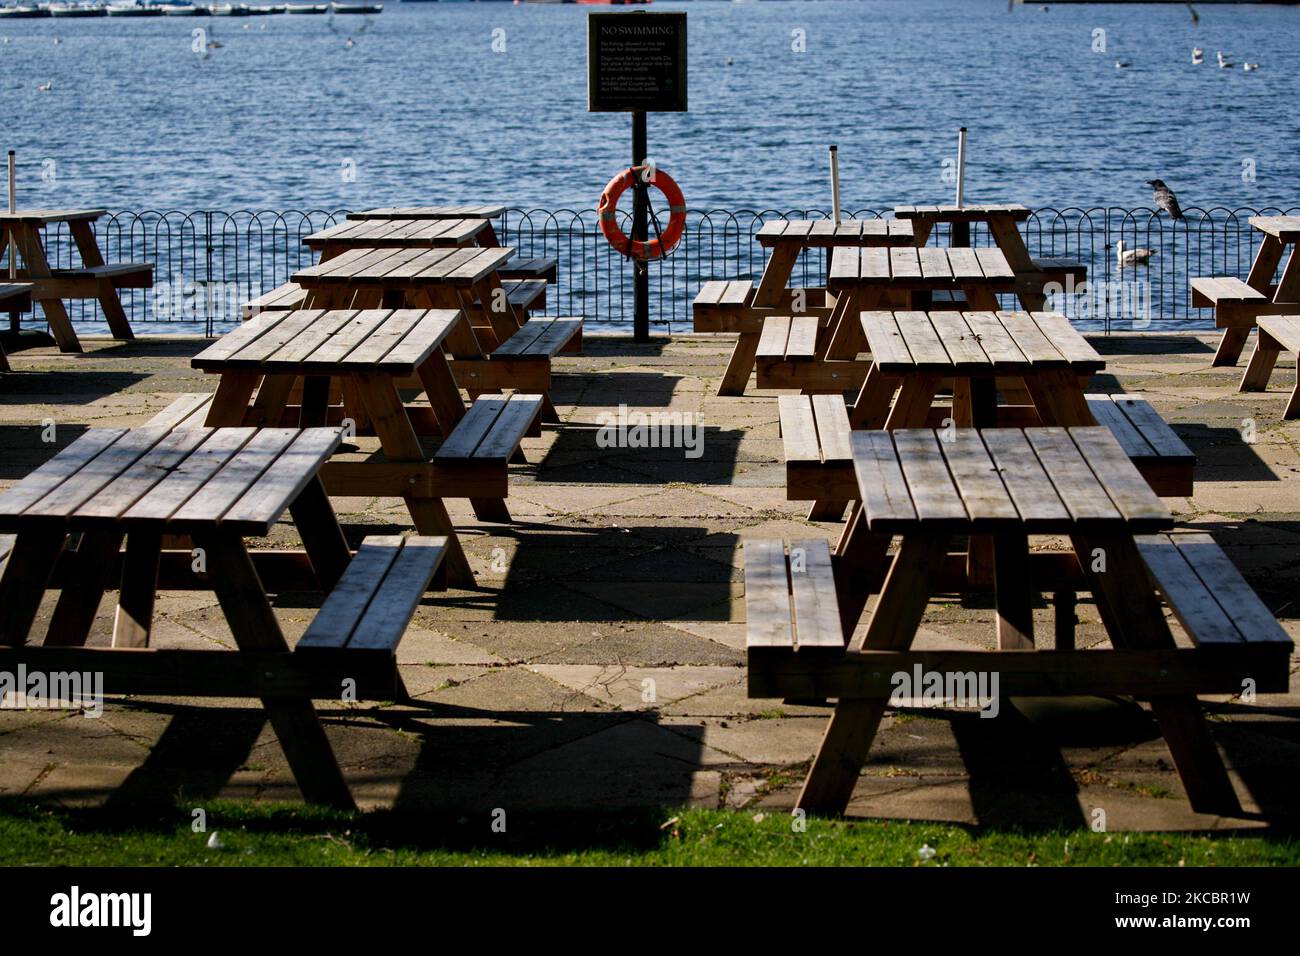 Empty tables sit out in the temporarily-closed outdoor seating area of a cafe beside the Serpentine lake in Hyde Park in London, England, on March 29, 2021. Lockdown restrictions were eased across England today, with the 'stay home' rule ended, groups of up to six allowed to meet outside, outdoor sports restarted and weddings with up to six people attending permitted to go ahead. Shops, hospitality and leisure businesses remain closed however, with the next relaxation of restrictions not due until April 12 at the earliest. Today's easing has meanwhile coincided with the first of a three-day 'm Stock Photo